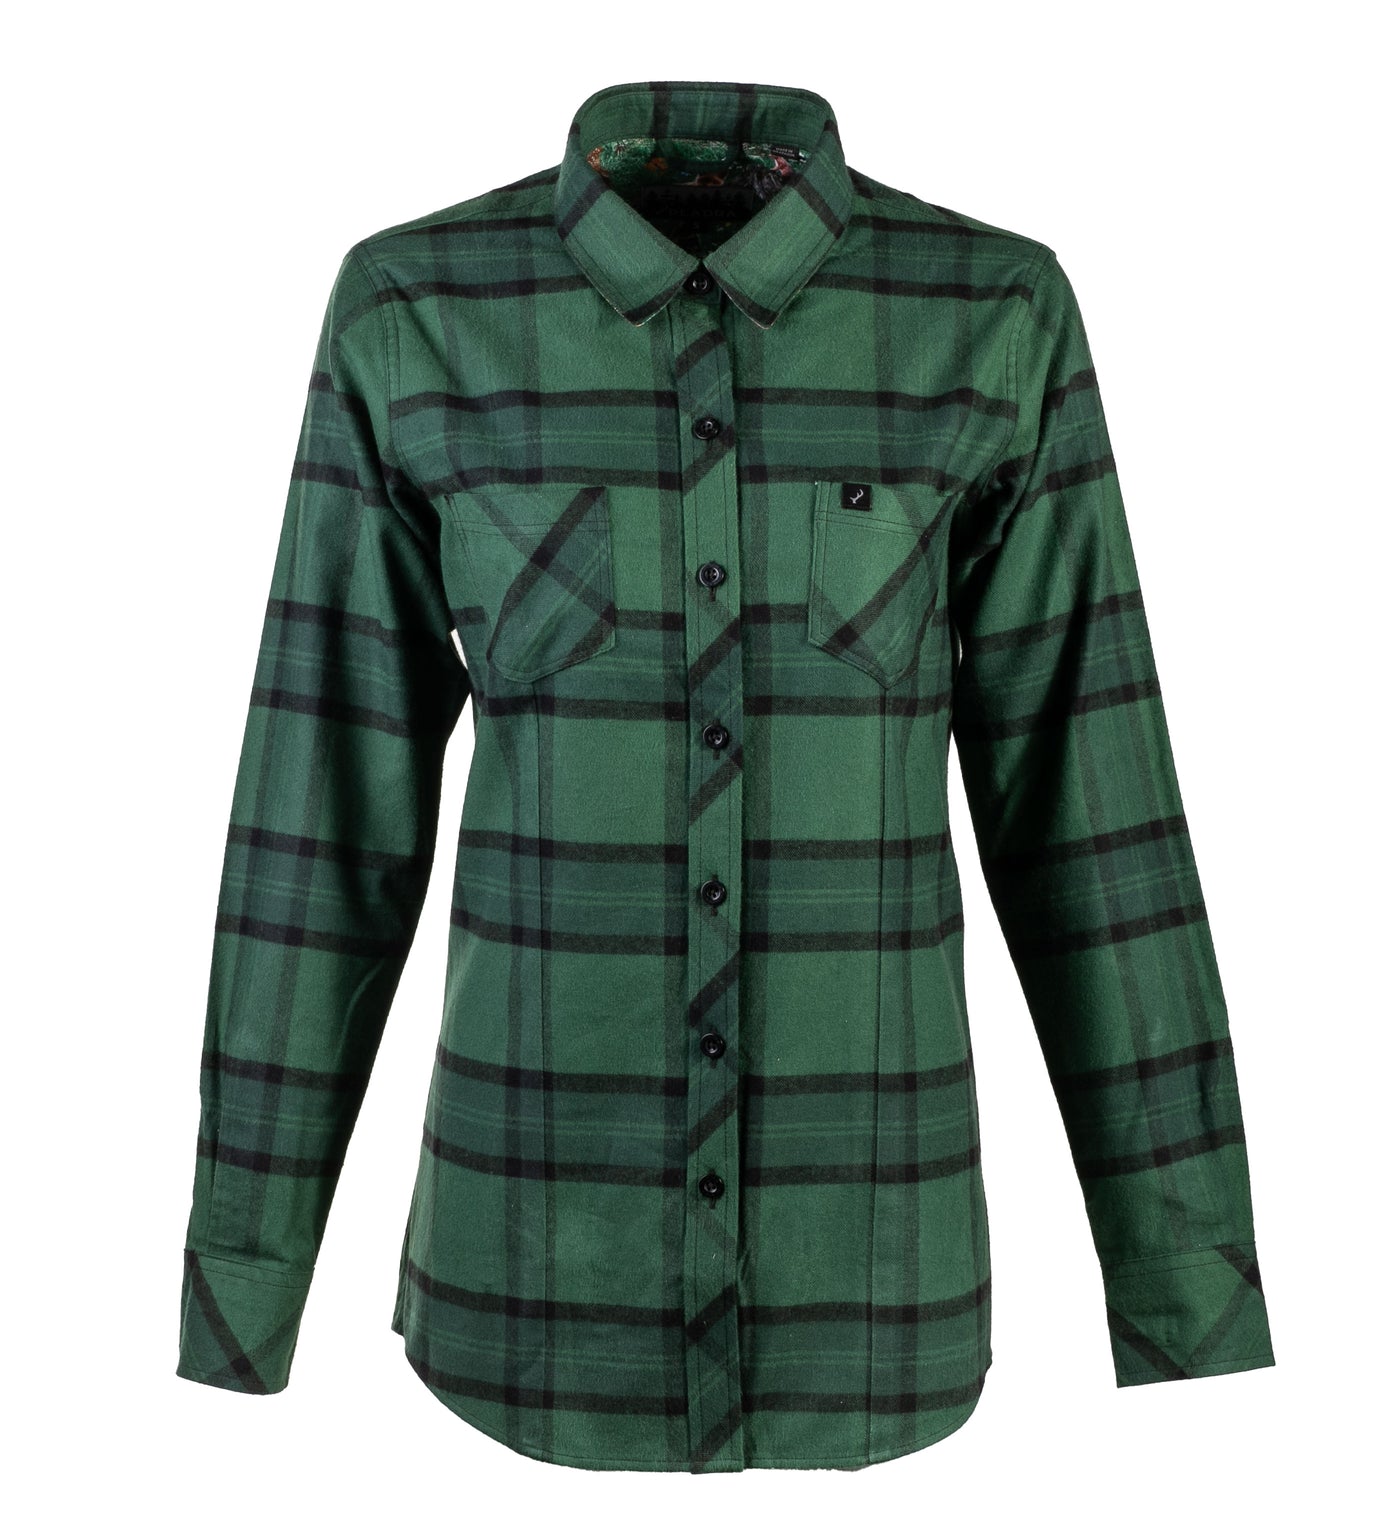 Women's Every Day Flannel Shirt- Ever Green